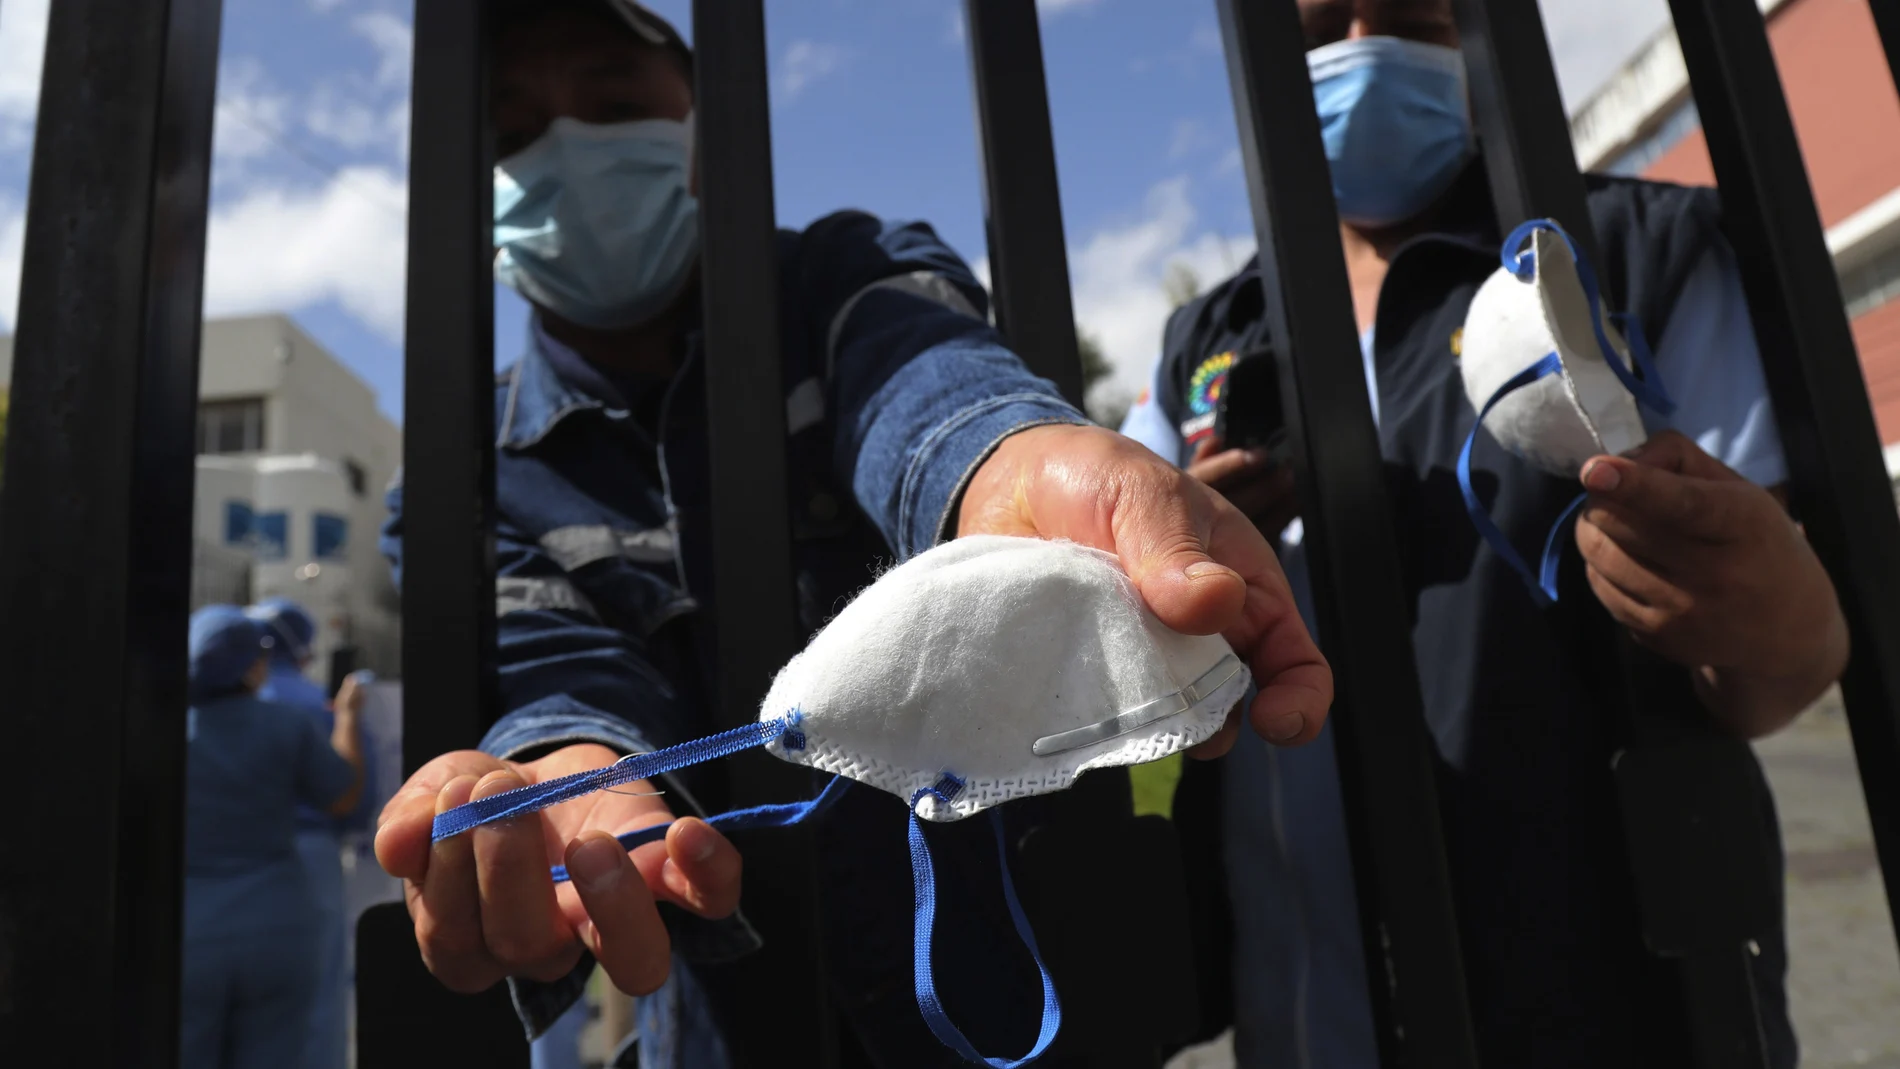 Workers of the Eugenio Espejo hospital show worn out masks they use to work, during a protest to demand that the government deliver personal protection equipment, to be able to carry out their work safely during the new coronavirus pandemic, in Quito, Ecuador, Tuesday, April 28, 2020.The South American country has been hit hard by the pandemic, with the city of Guayaquil been hit especially hard. (AP Photo/Dolores Ochoa)